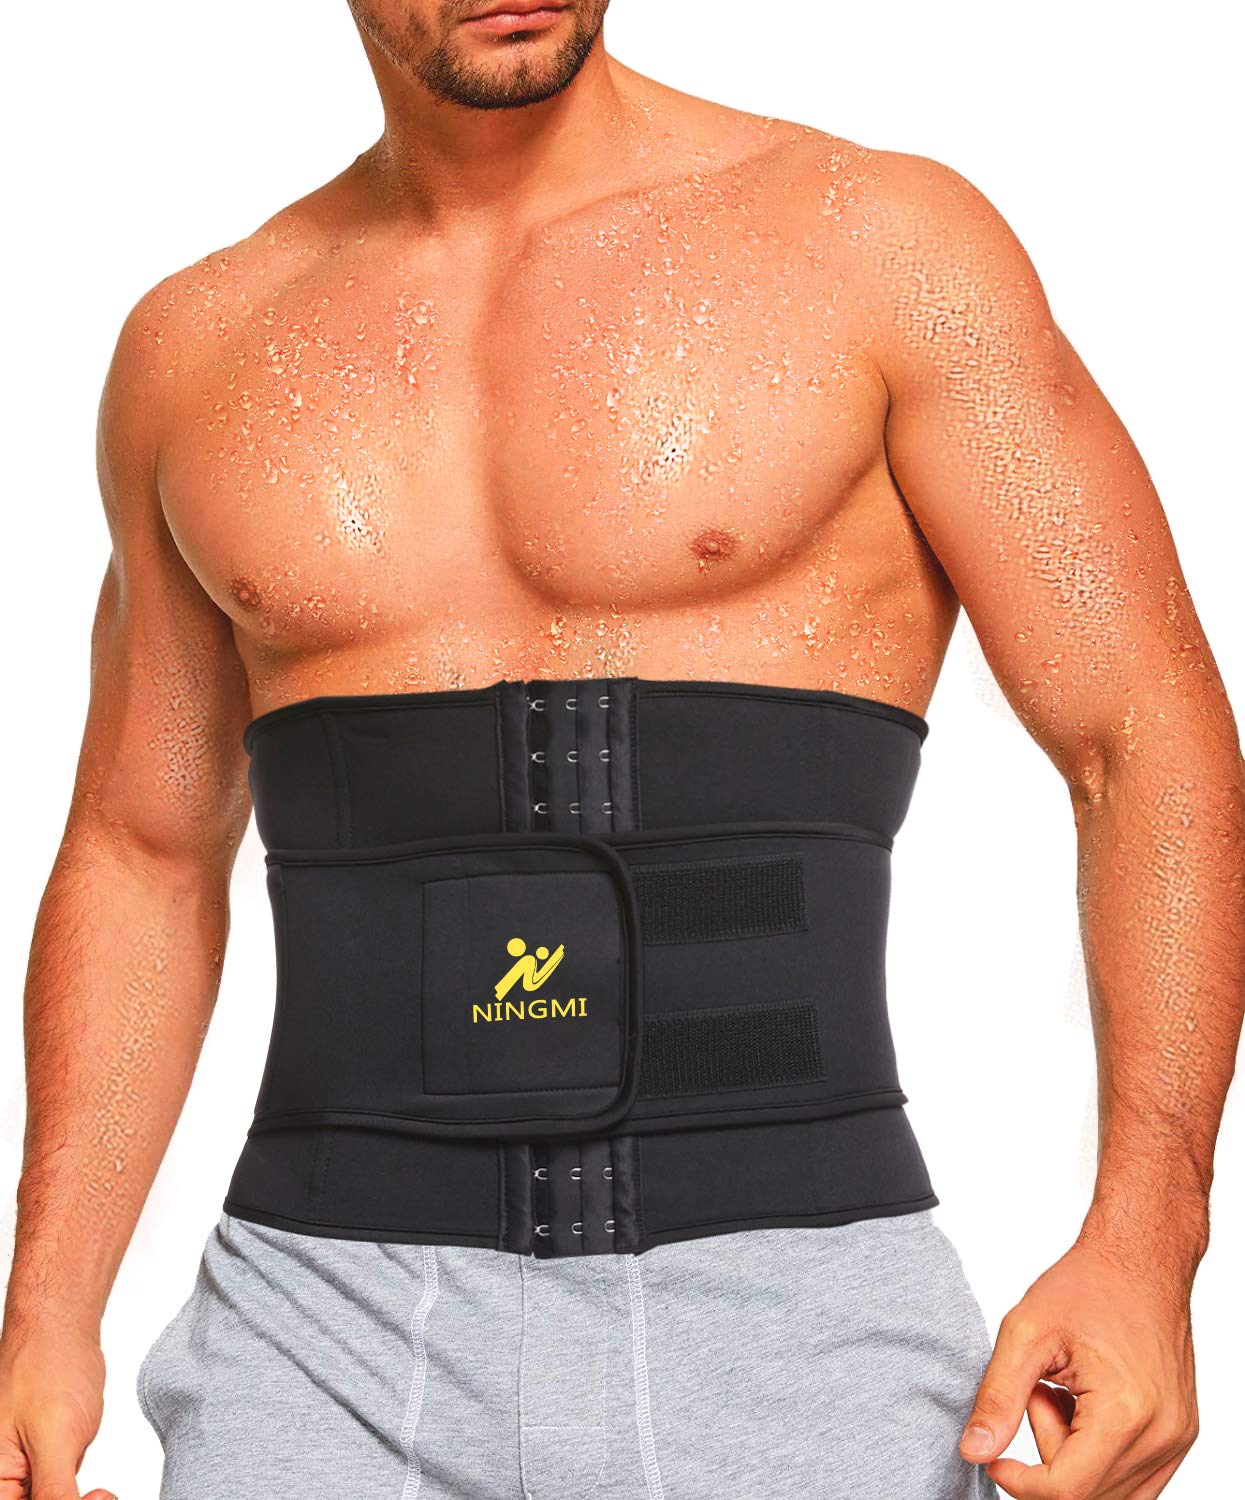 Ningmi Waist Trainer For Men Sweat Belt - Sauna Trimmer Stomach Wraps  Workout Band Male Waste Trainers Corset Belly Strap Gray